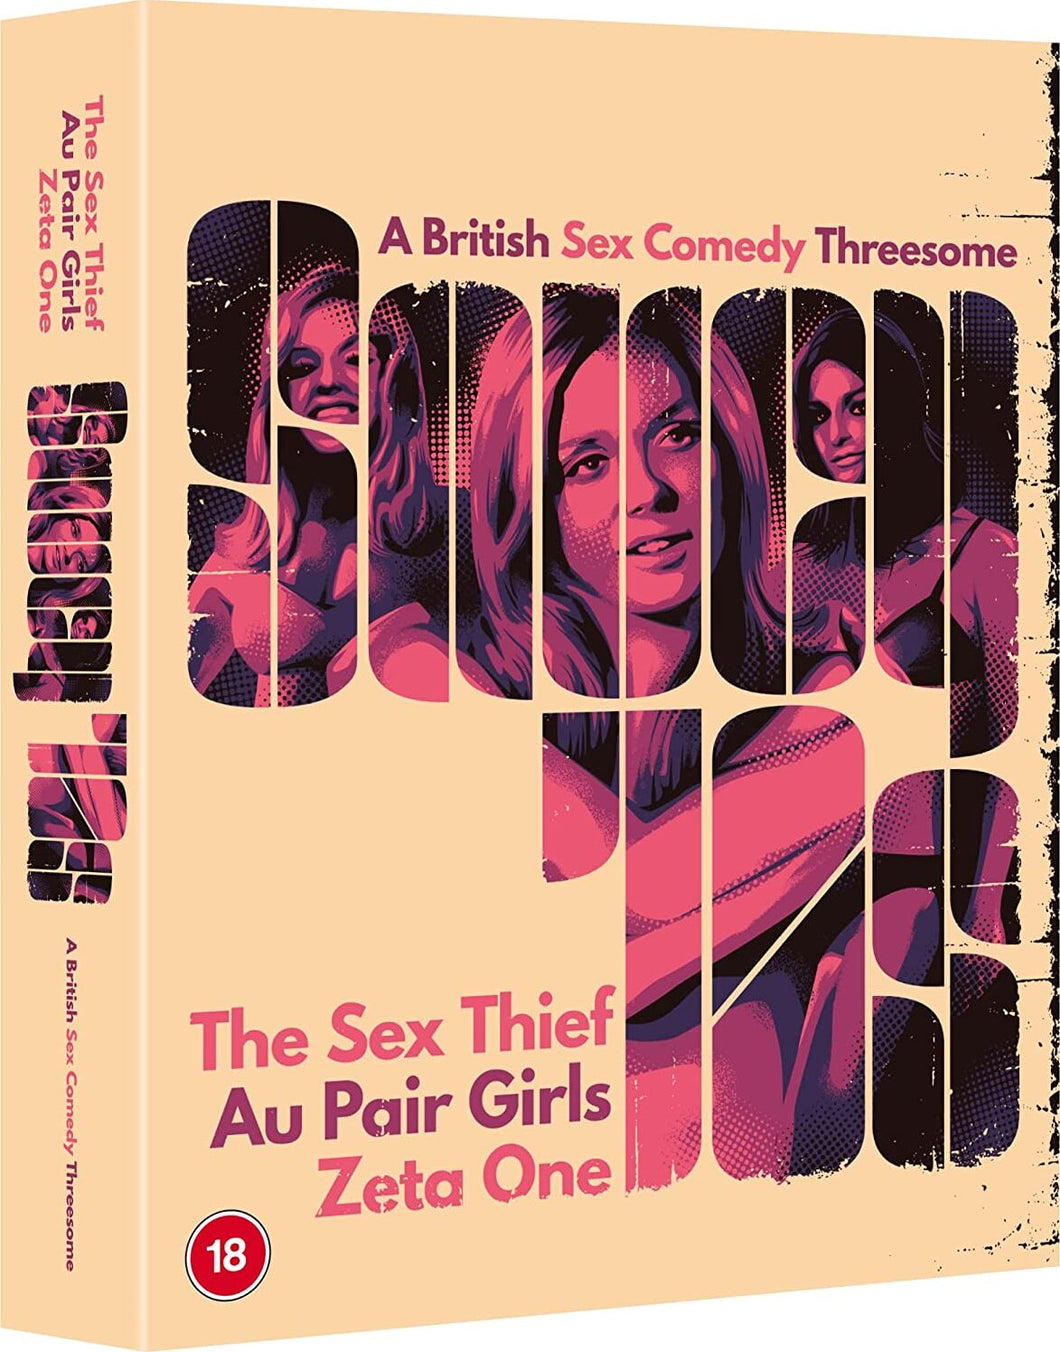 Saucy 70s - A British Sex Comedy Threesome  - front cover